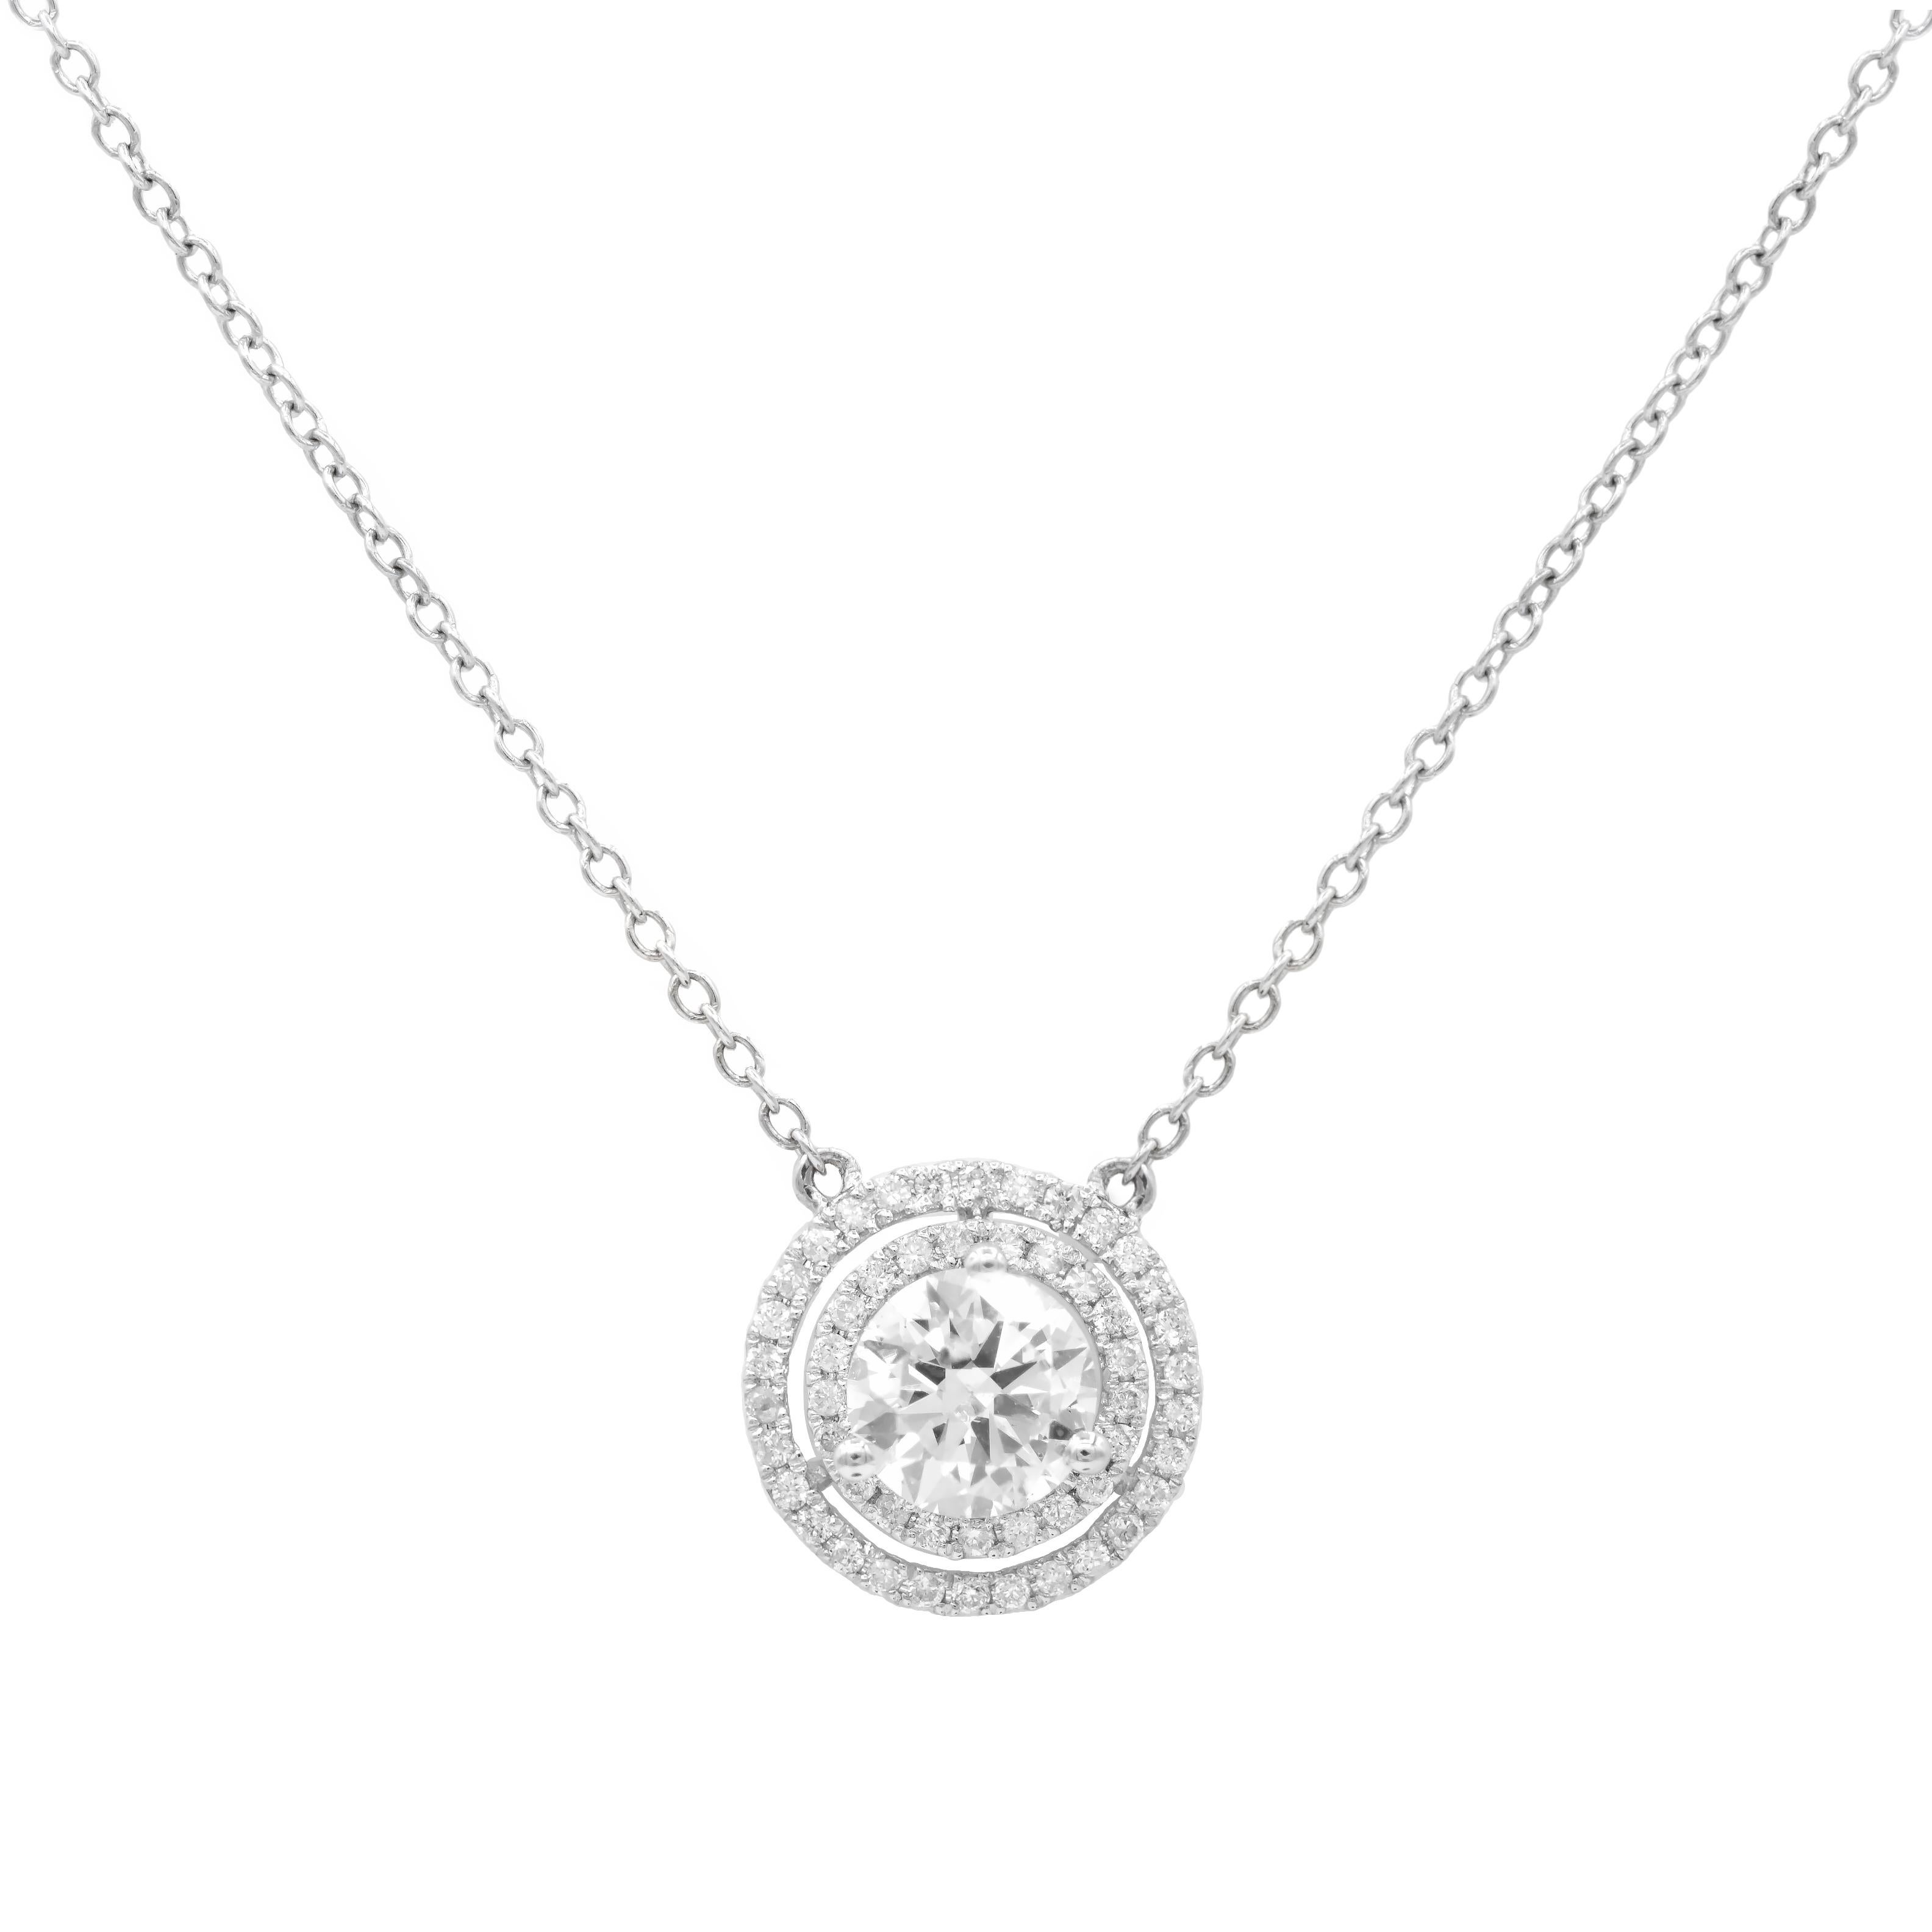 18KT DIAMOND PENDENT WITH  J/SI2 2.02CT SORUNDDED WITH DOUBLE HALO .40CTS ALL SET IN WHITE GOLD 
Diana M. is a leading supplier of top-quality fine jewelry for over 35 years.
Diana M is one-stop shop for all your jewelry shopping, carrying line of